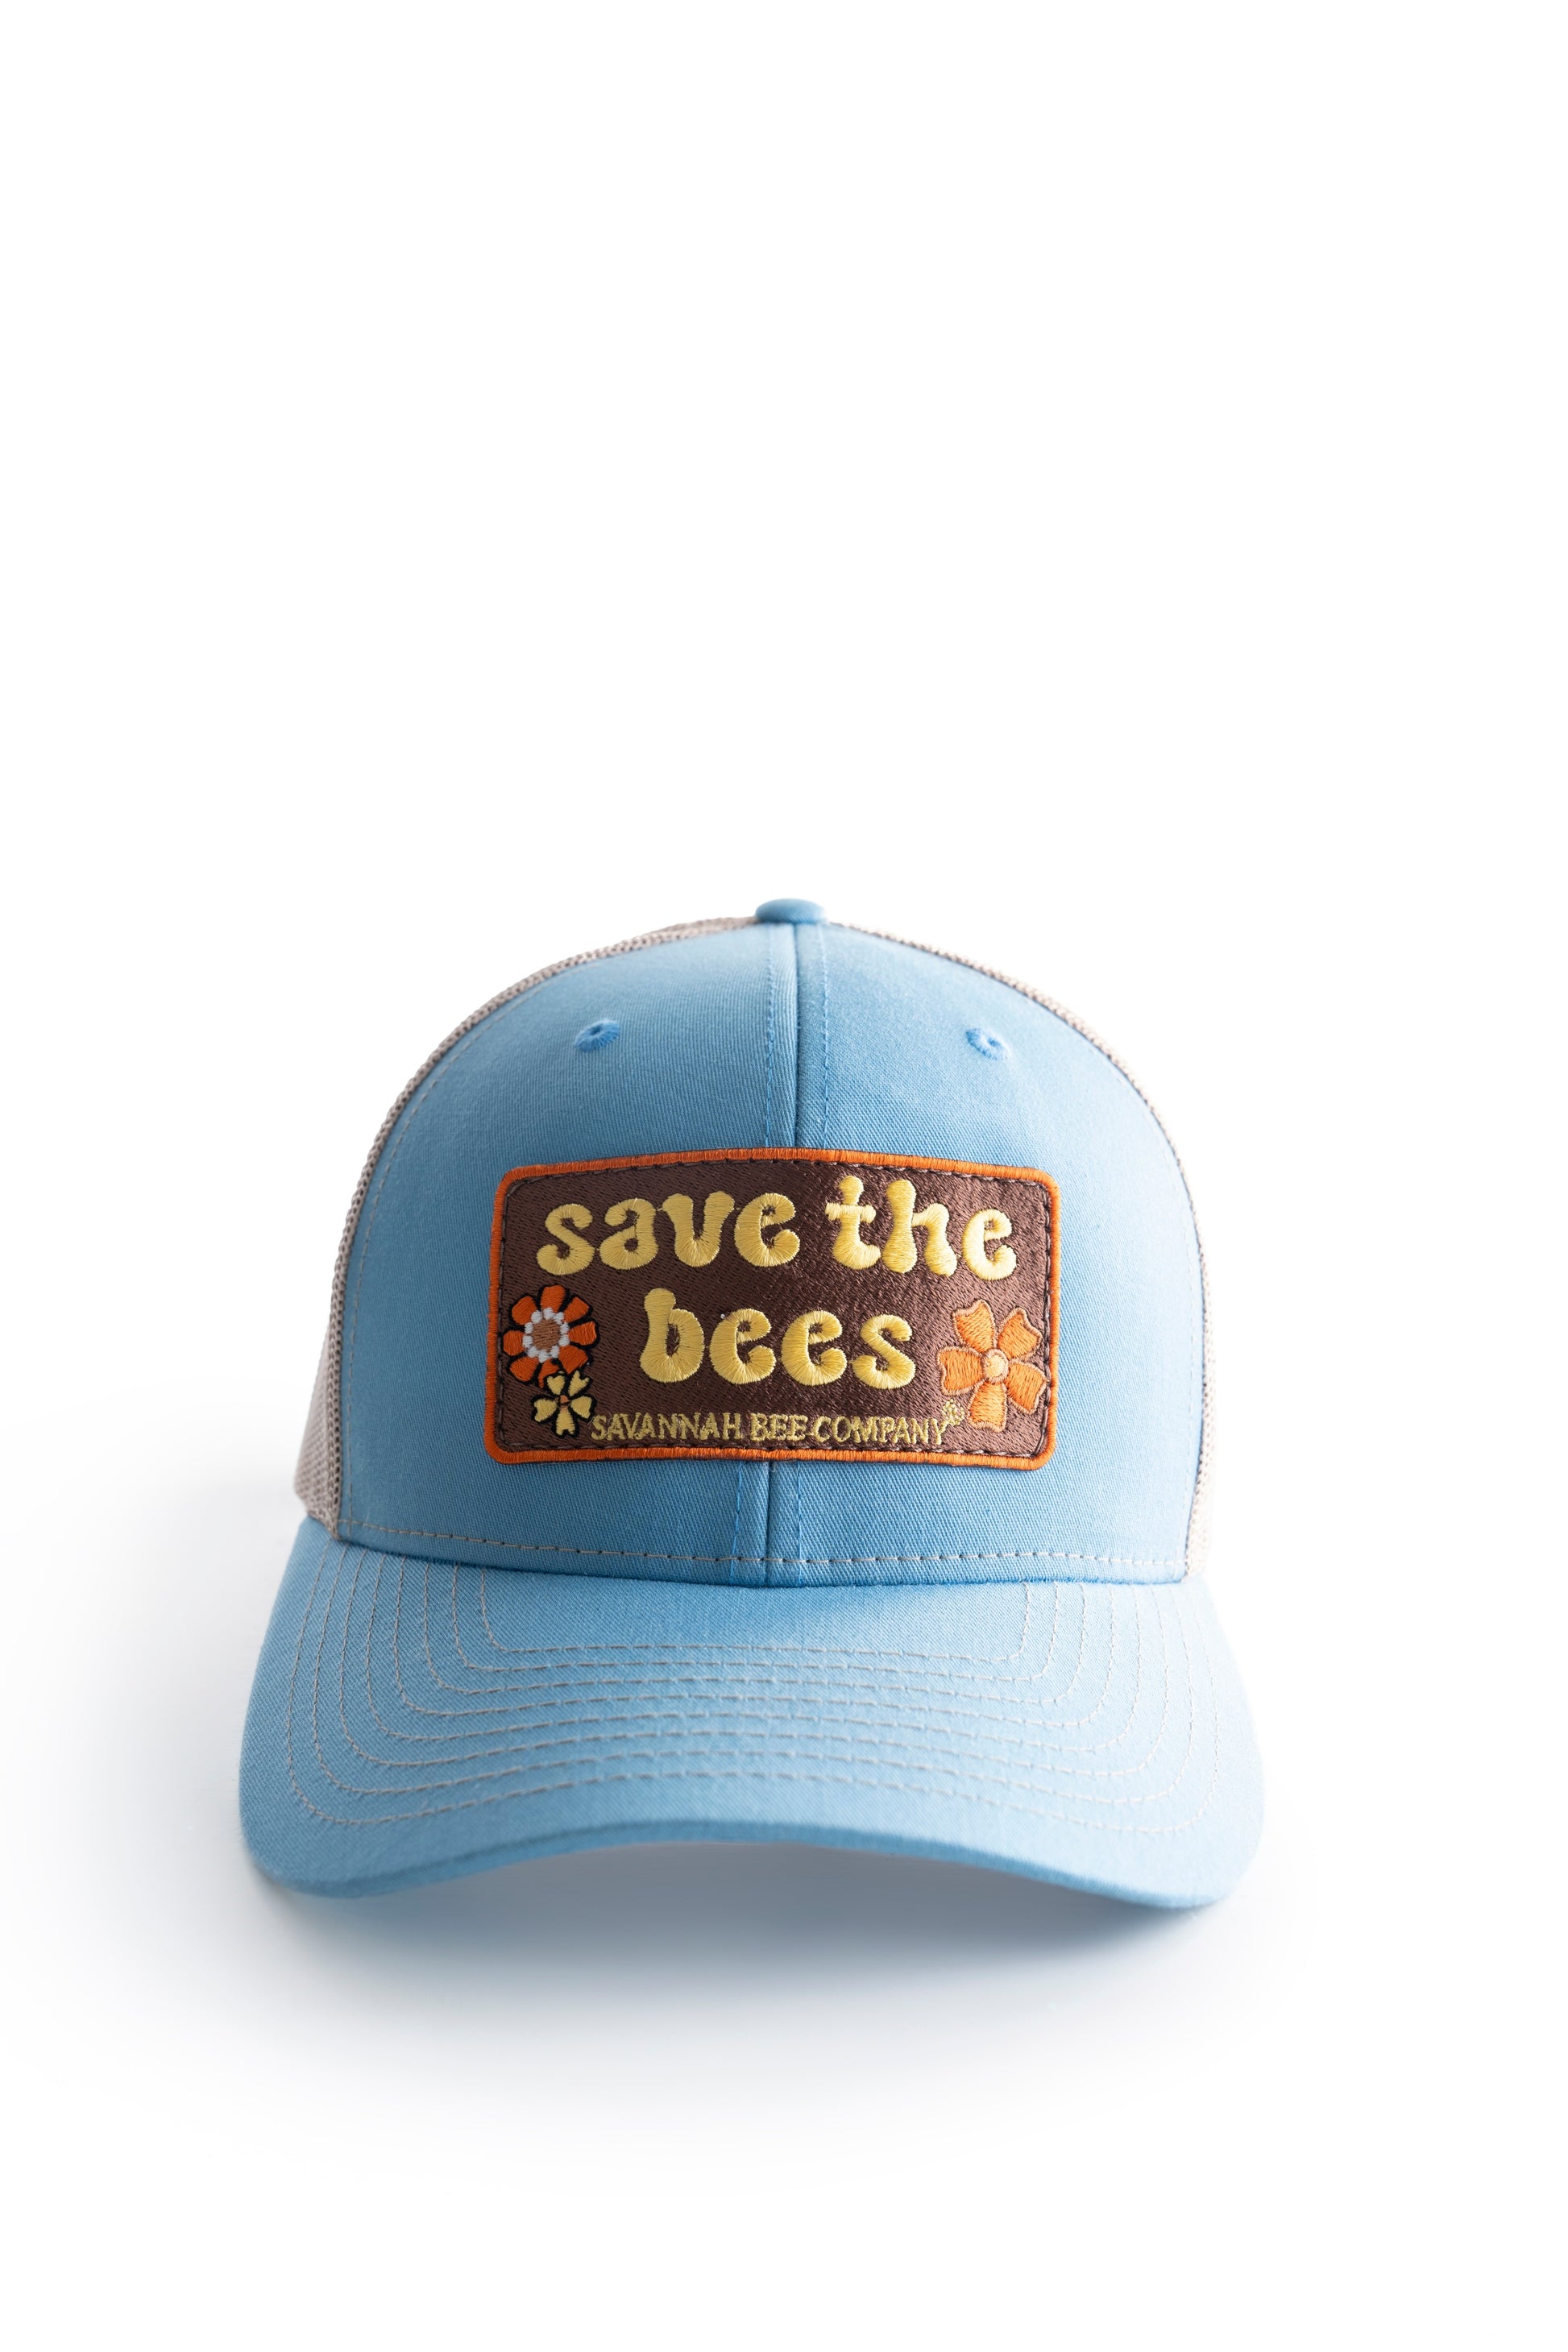 Blue save the bees trucker hat with groovy font facing front